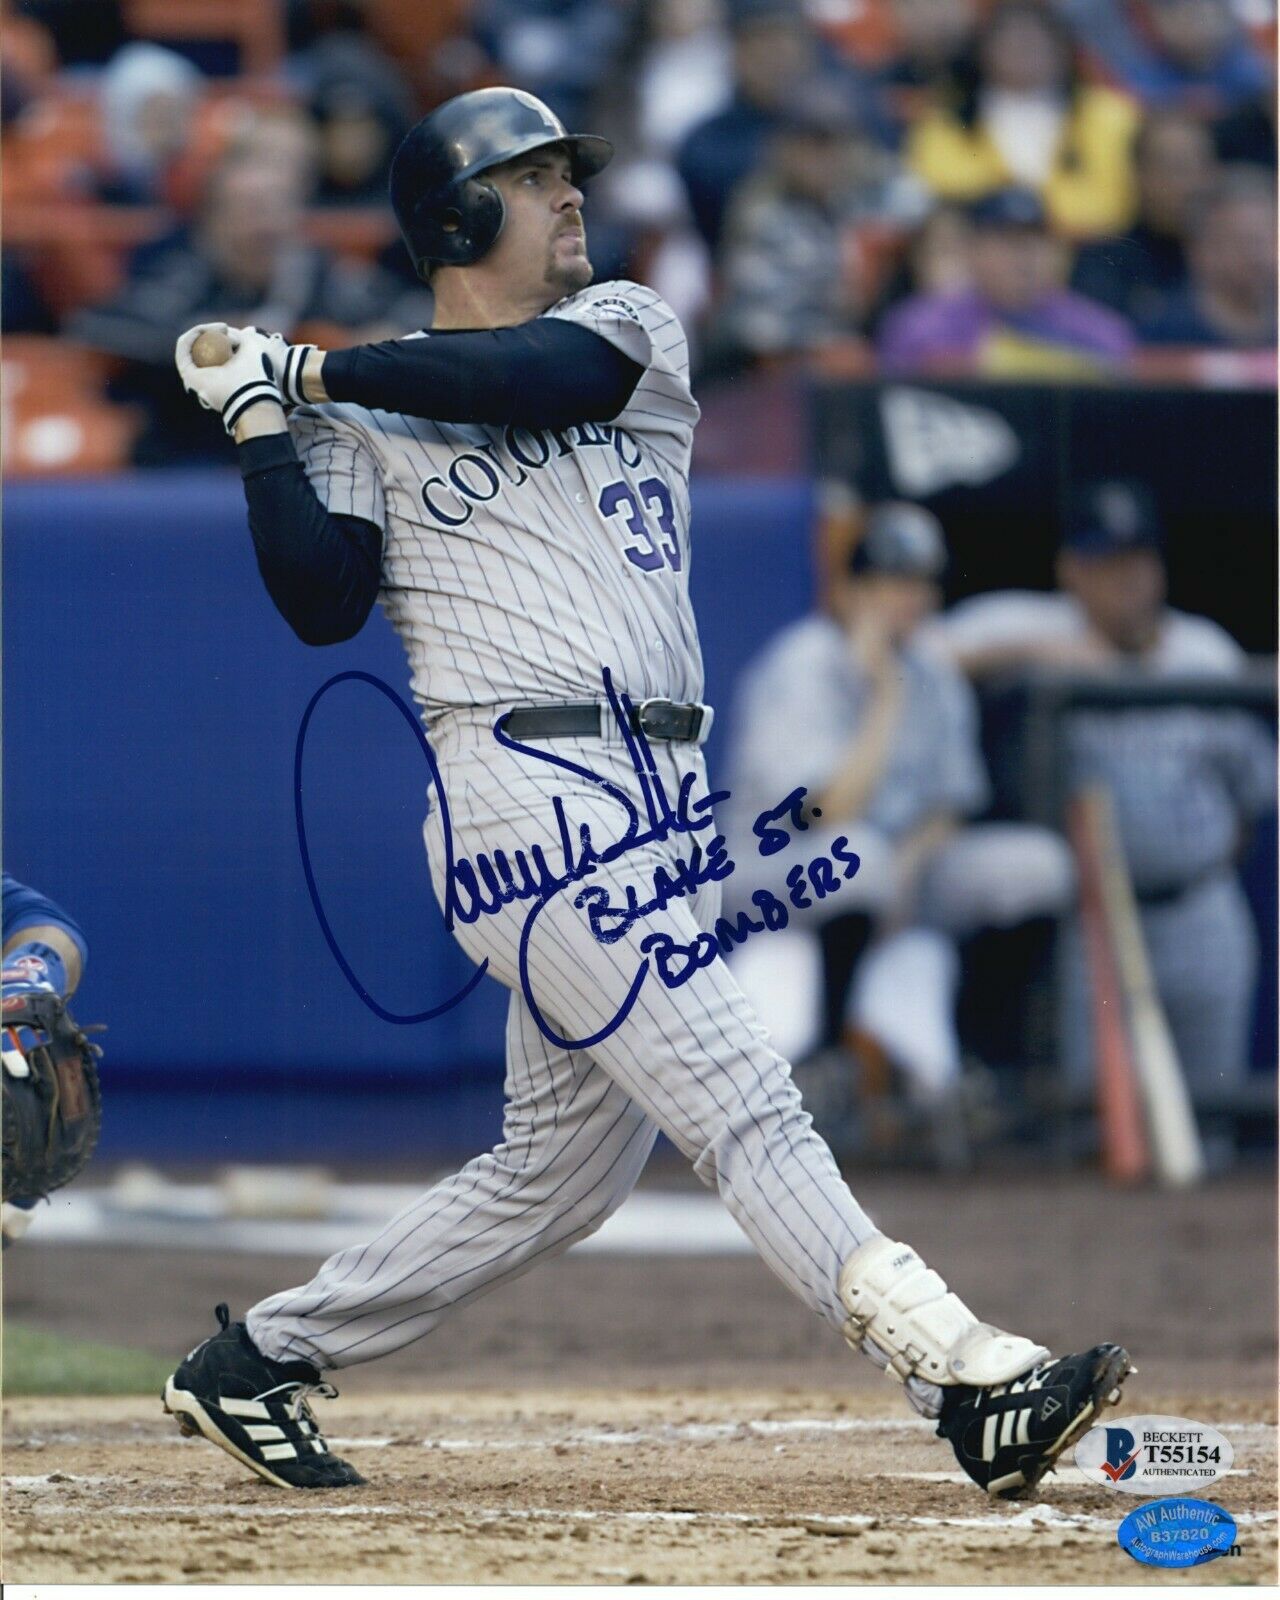 Larry Walker Signed 8x10 Photo BAS Auto Inscribed Blake St. Bombers